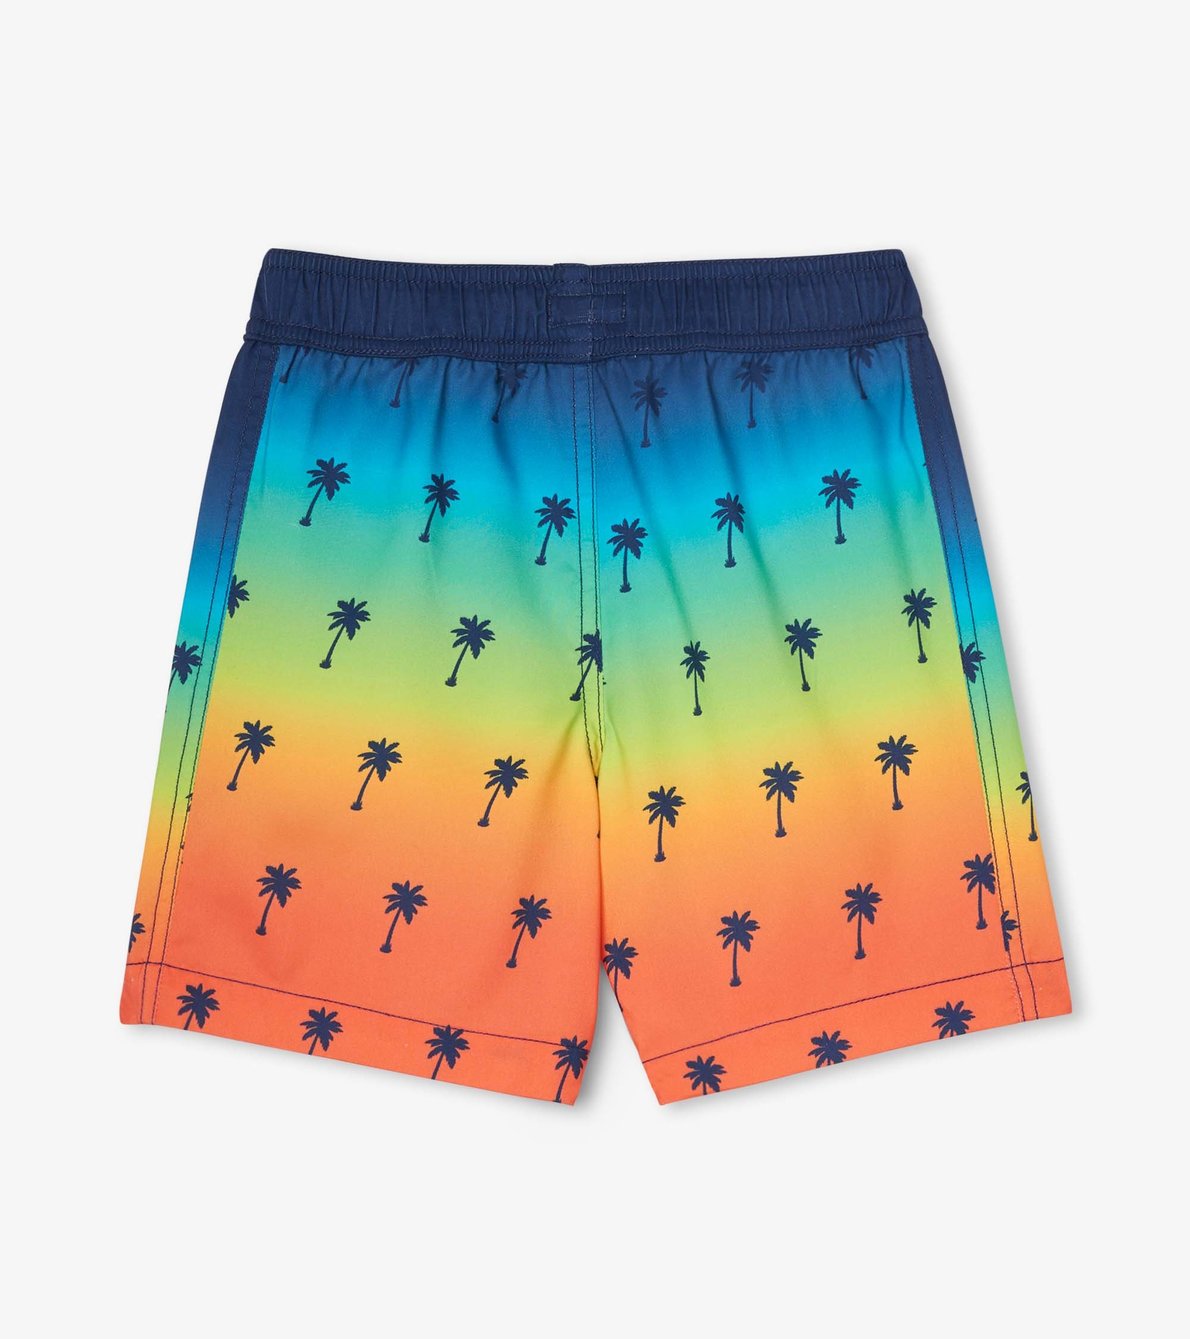 View larger image of Tropical Palms Swim Trunks